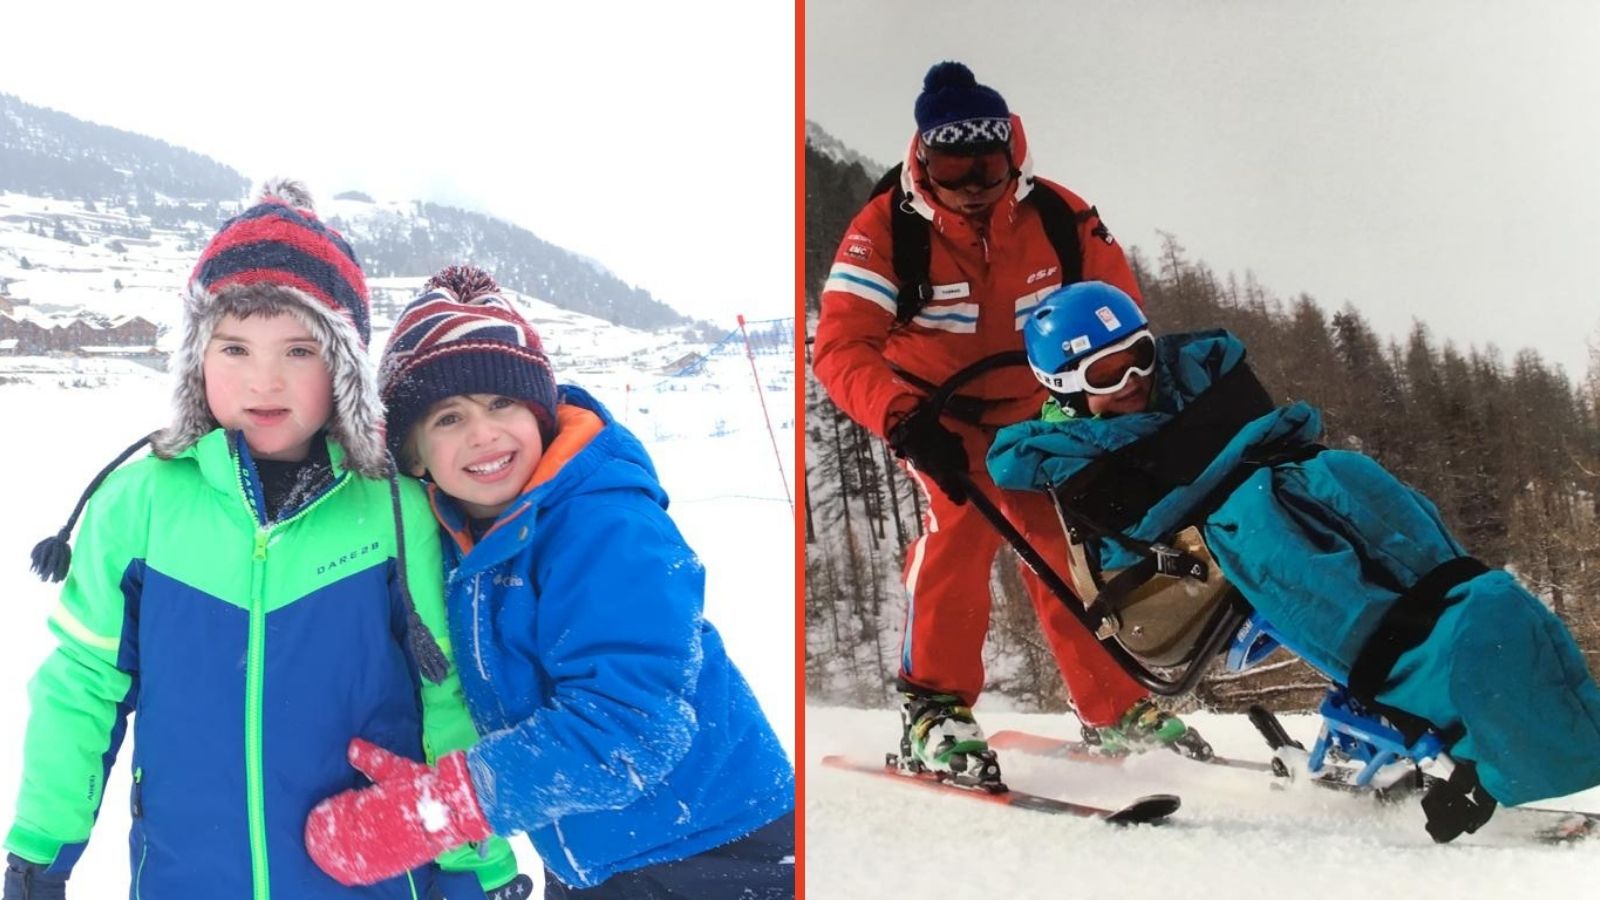 left - Ollie and brother Joe playing in the snow. right - Ollie being guided round the mountain by instructor Thomas